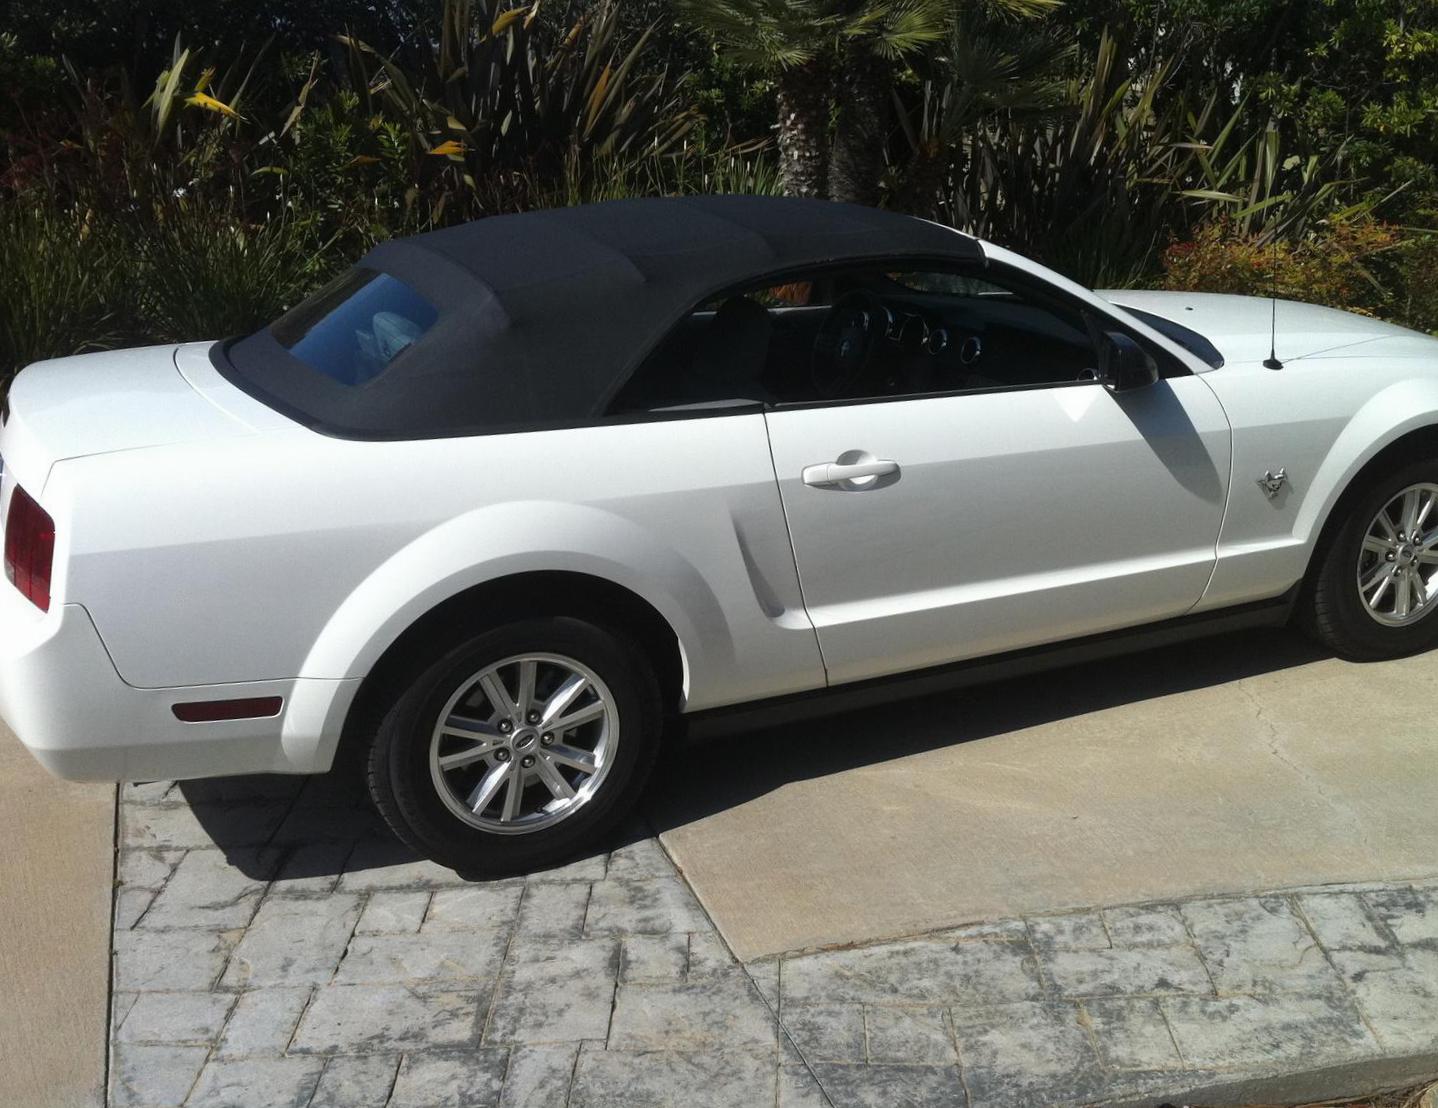 Ford Mustang Convertible new cabriolet